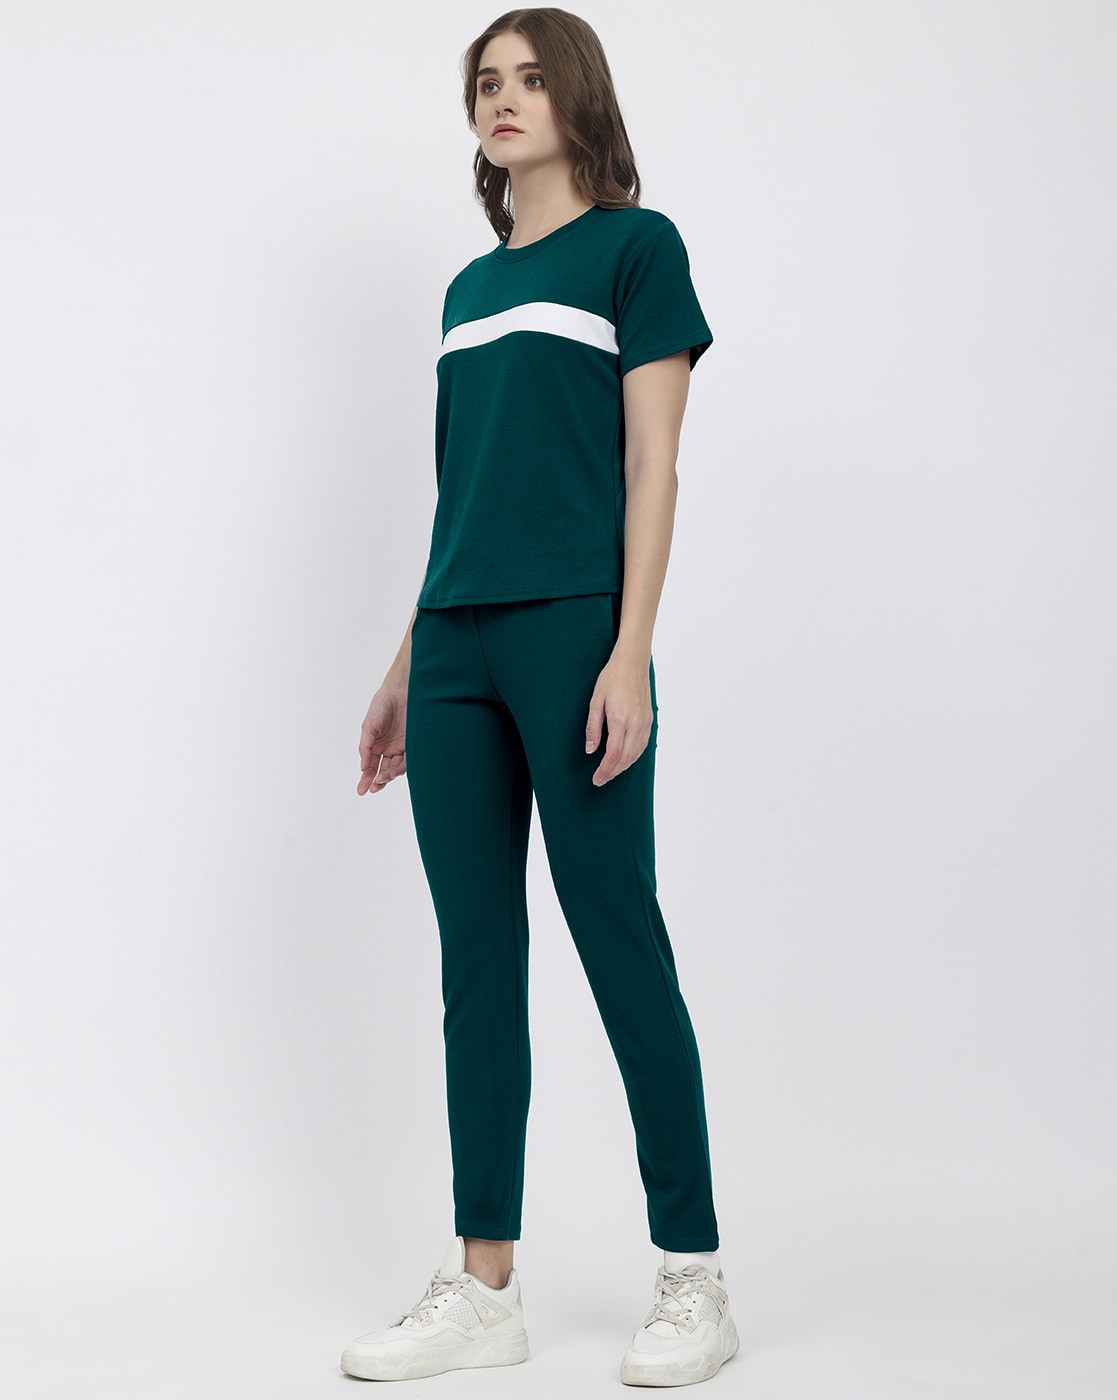 Buy Green Tracksuits for Women by Alisba Online